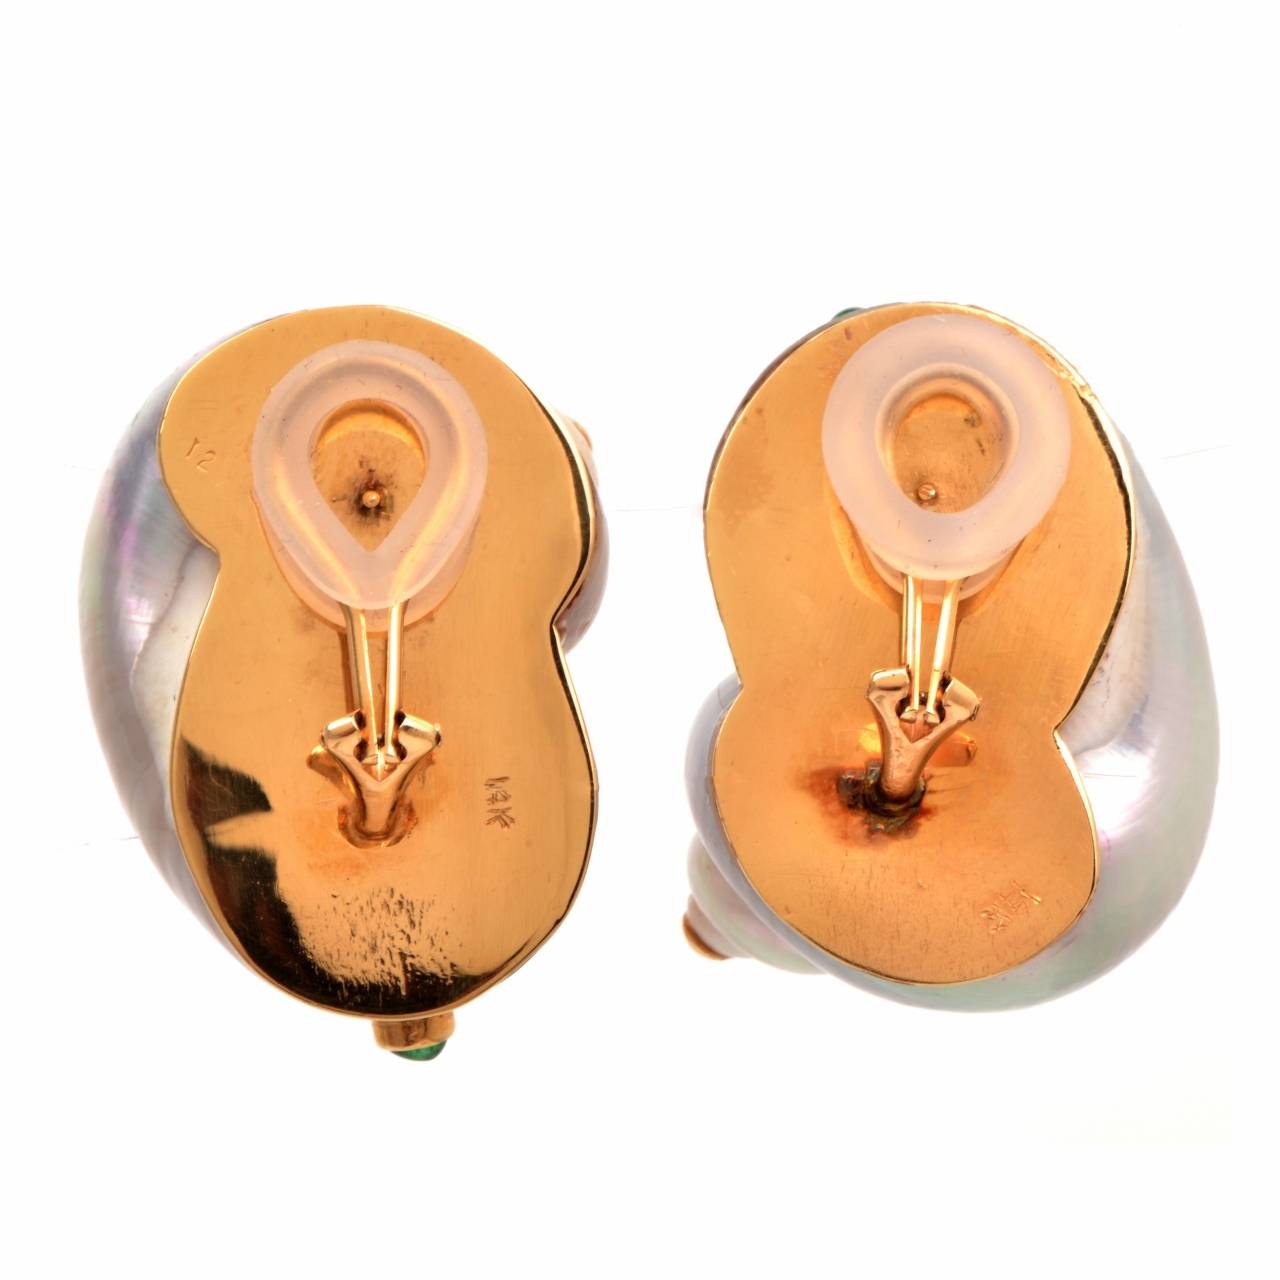 These estate earrings of opulent and colorful aesthetic designed to simulate natural sea-shells, are crafted in 14K yellow gold and mother of pearl (also referred to as Abalone shell), weigh 30.6 grams and measure 32 mm x  28 mm x 25 mm.  These